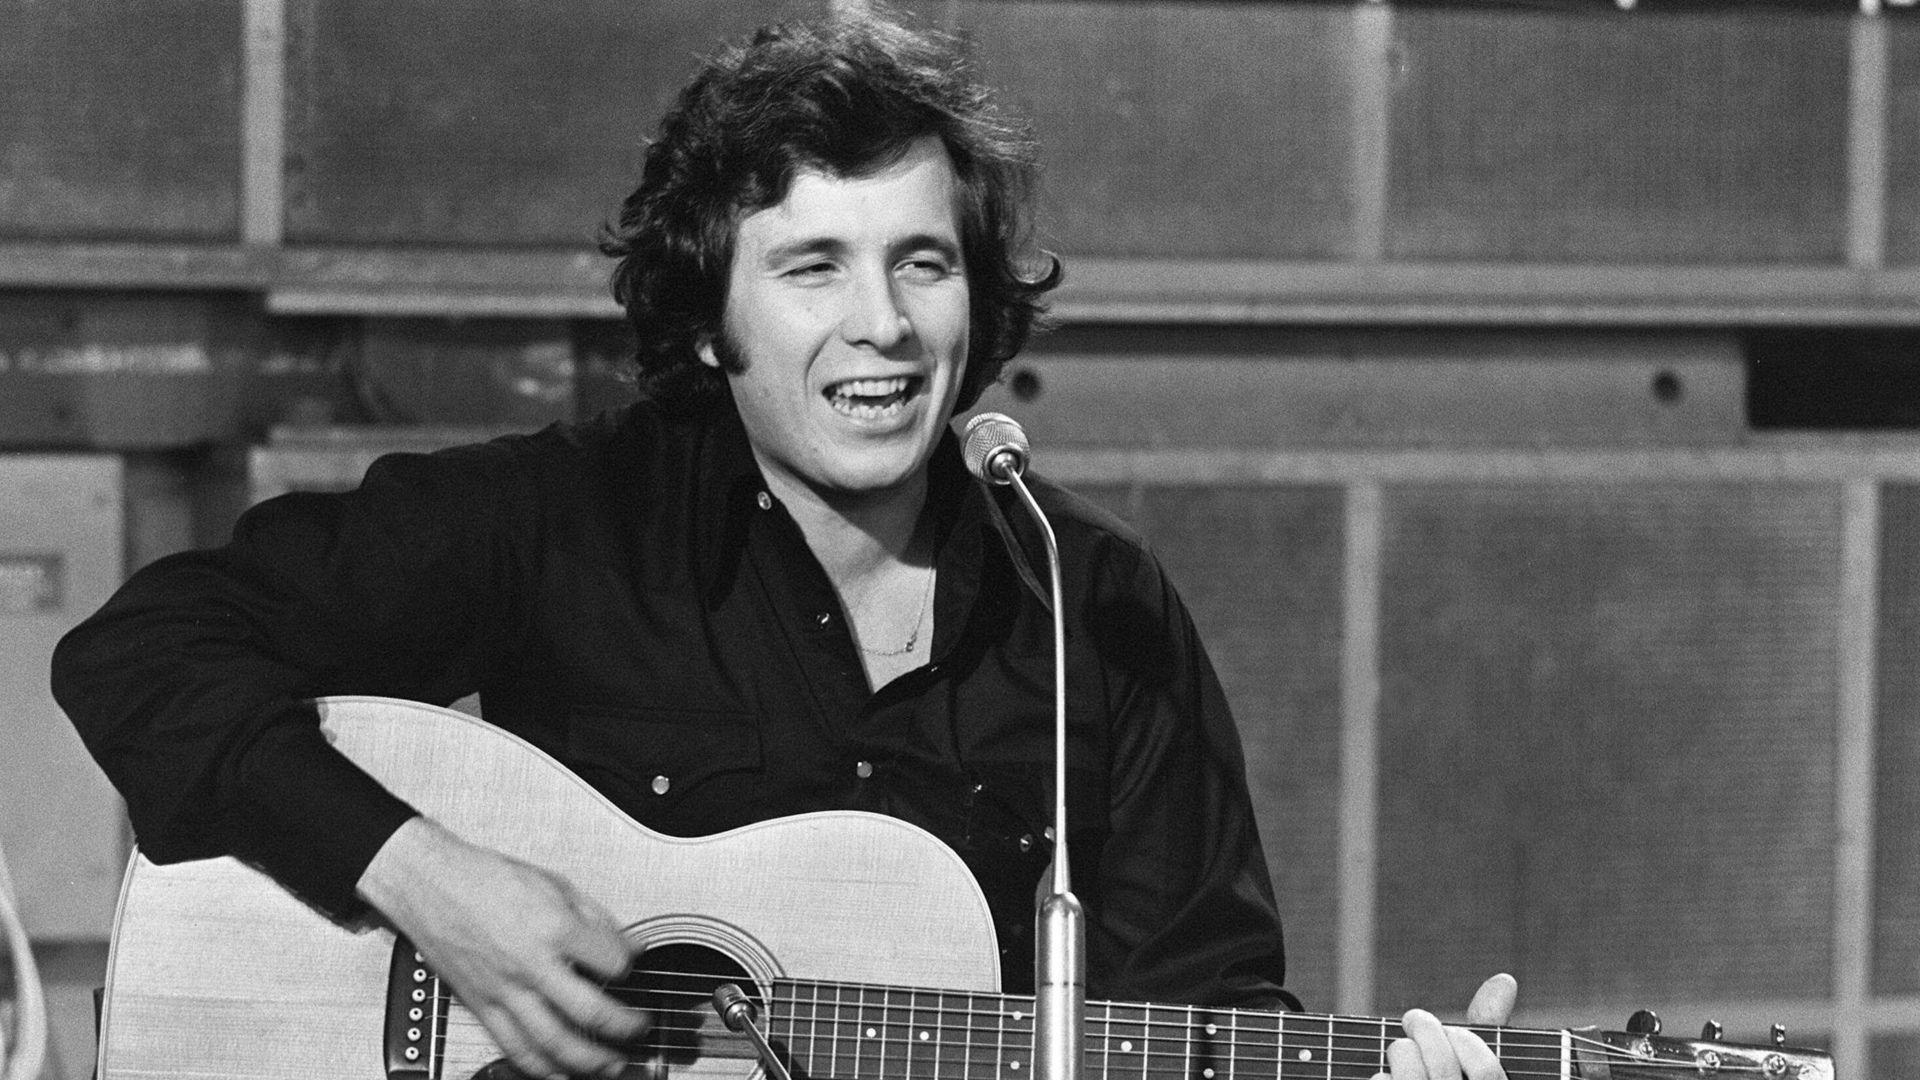 Behind the Music: 'American Pie' by Don McLean. Don mclean